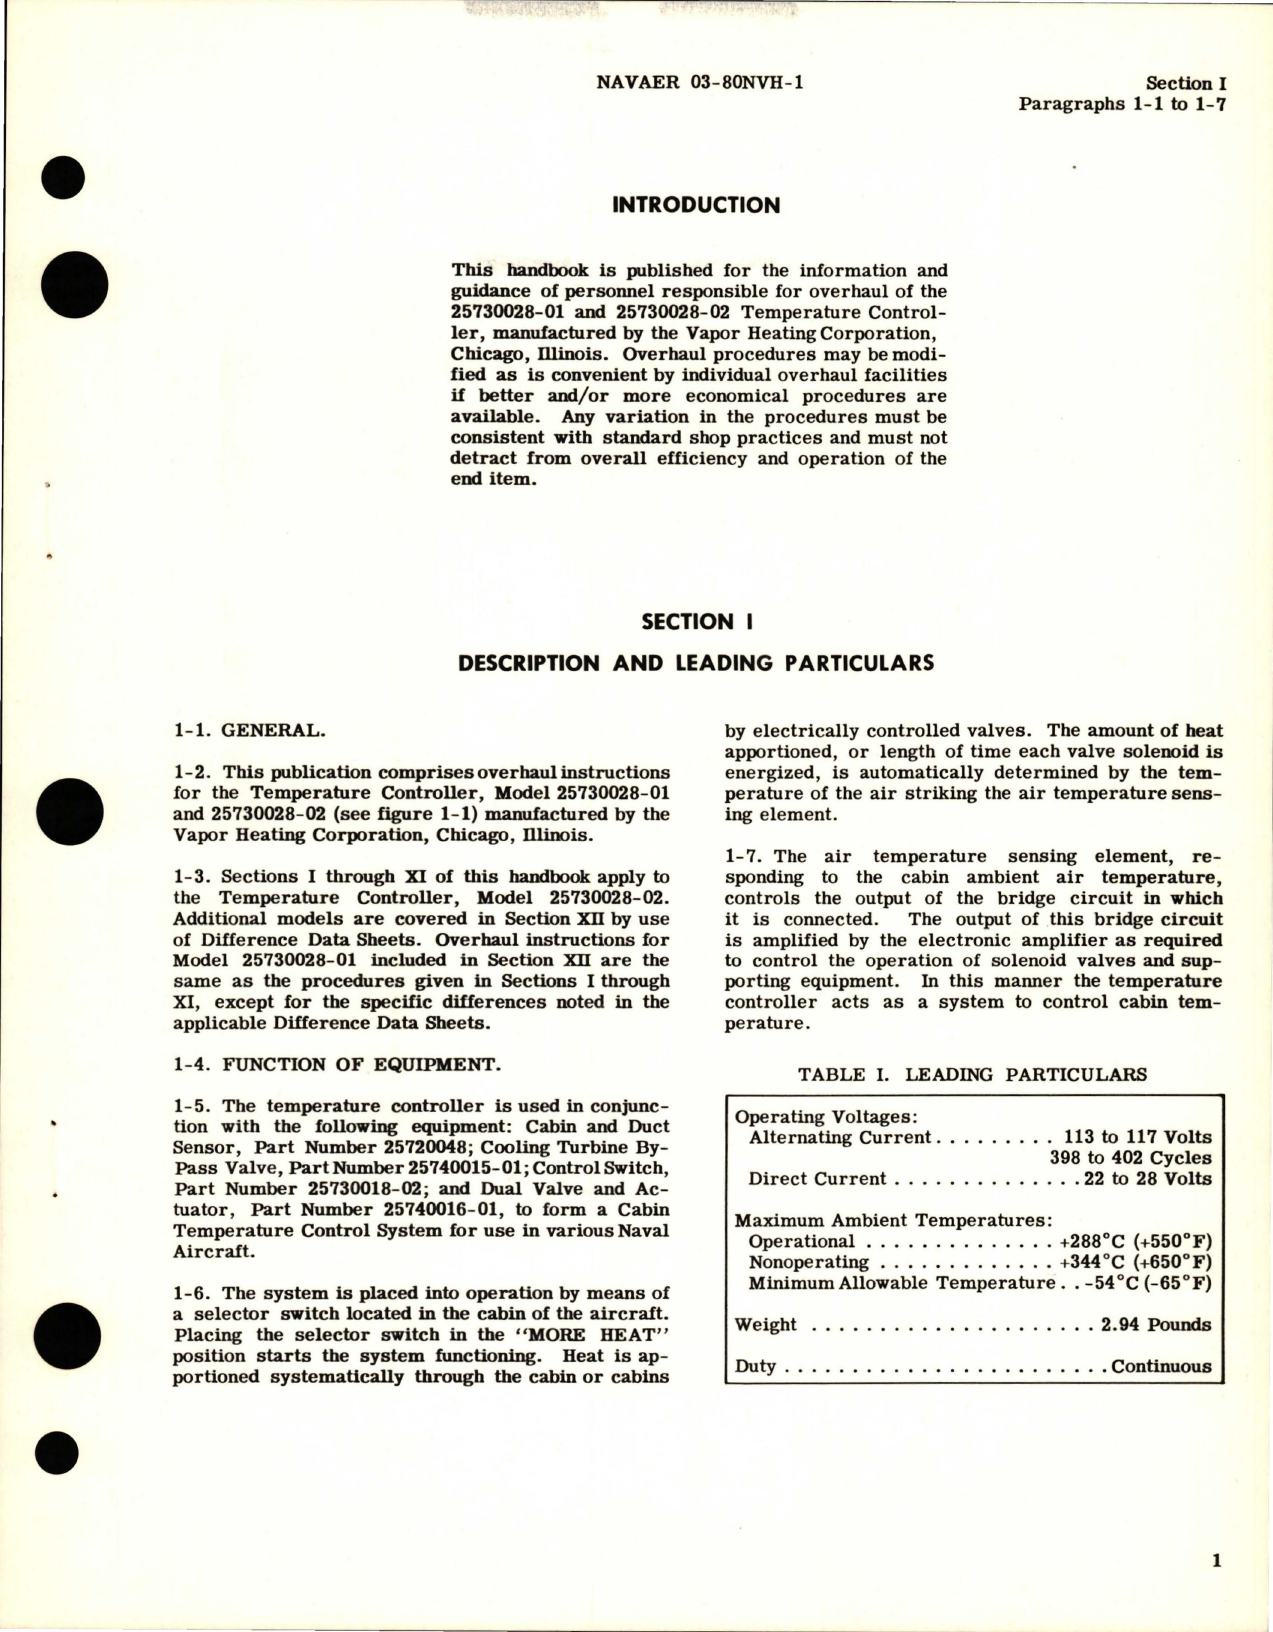 Sample page 5 from AirCorps Library document: Overhaul Instructions for Temperature Controller - 25730028-01 and 25730028-02 